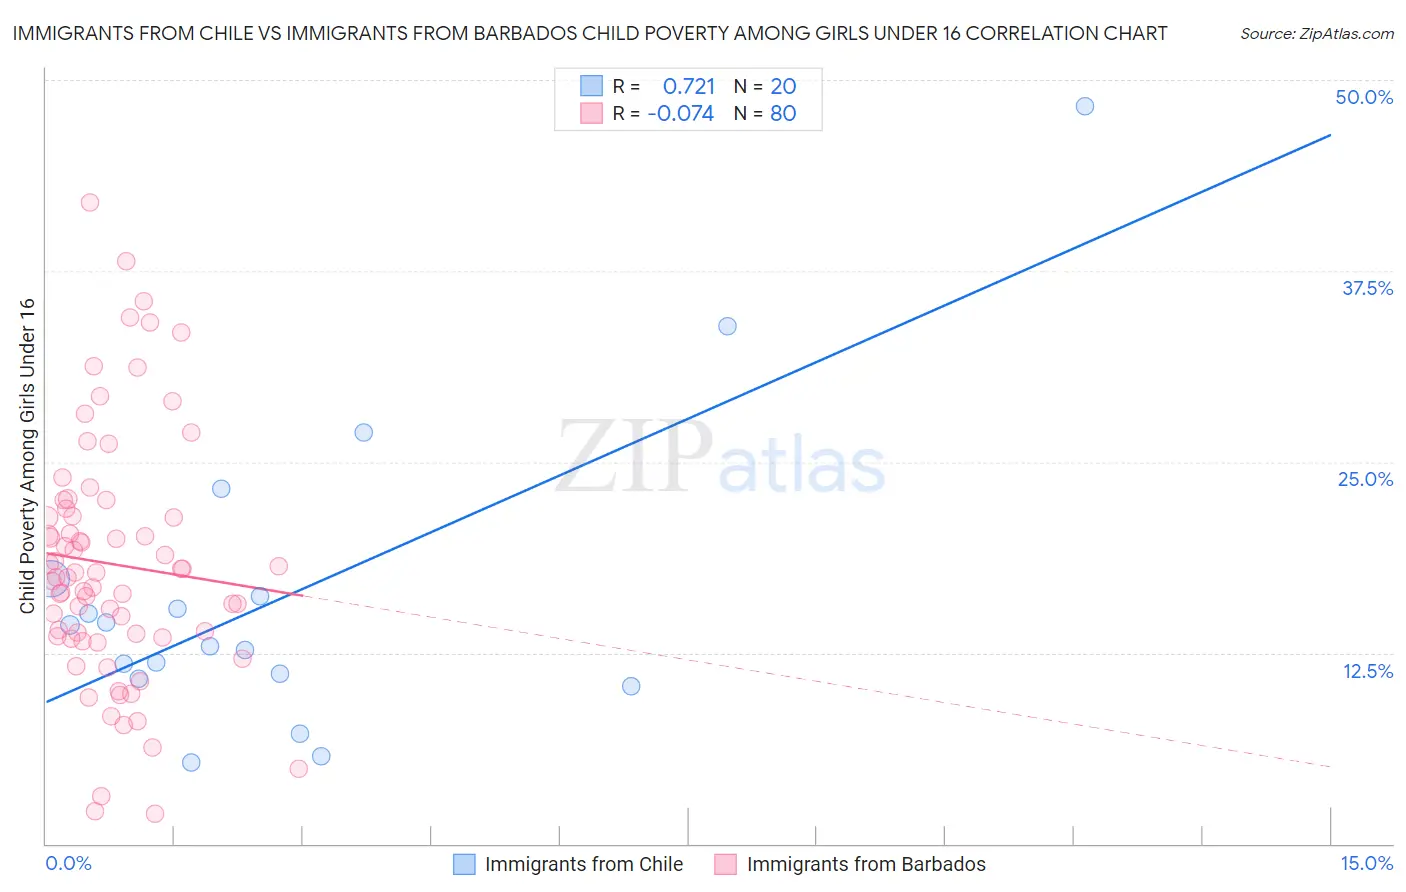 Immigrants from Chile vs Immigrants from Barbados Child Poverty Among Girls Under 16